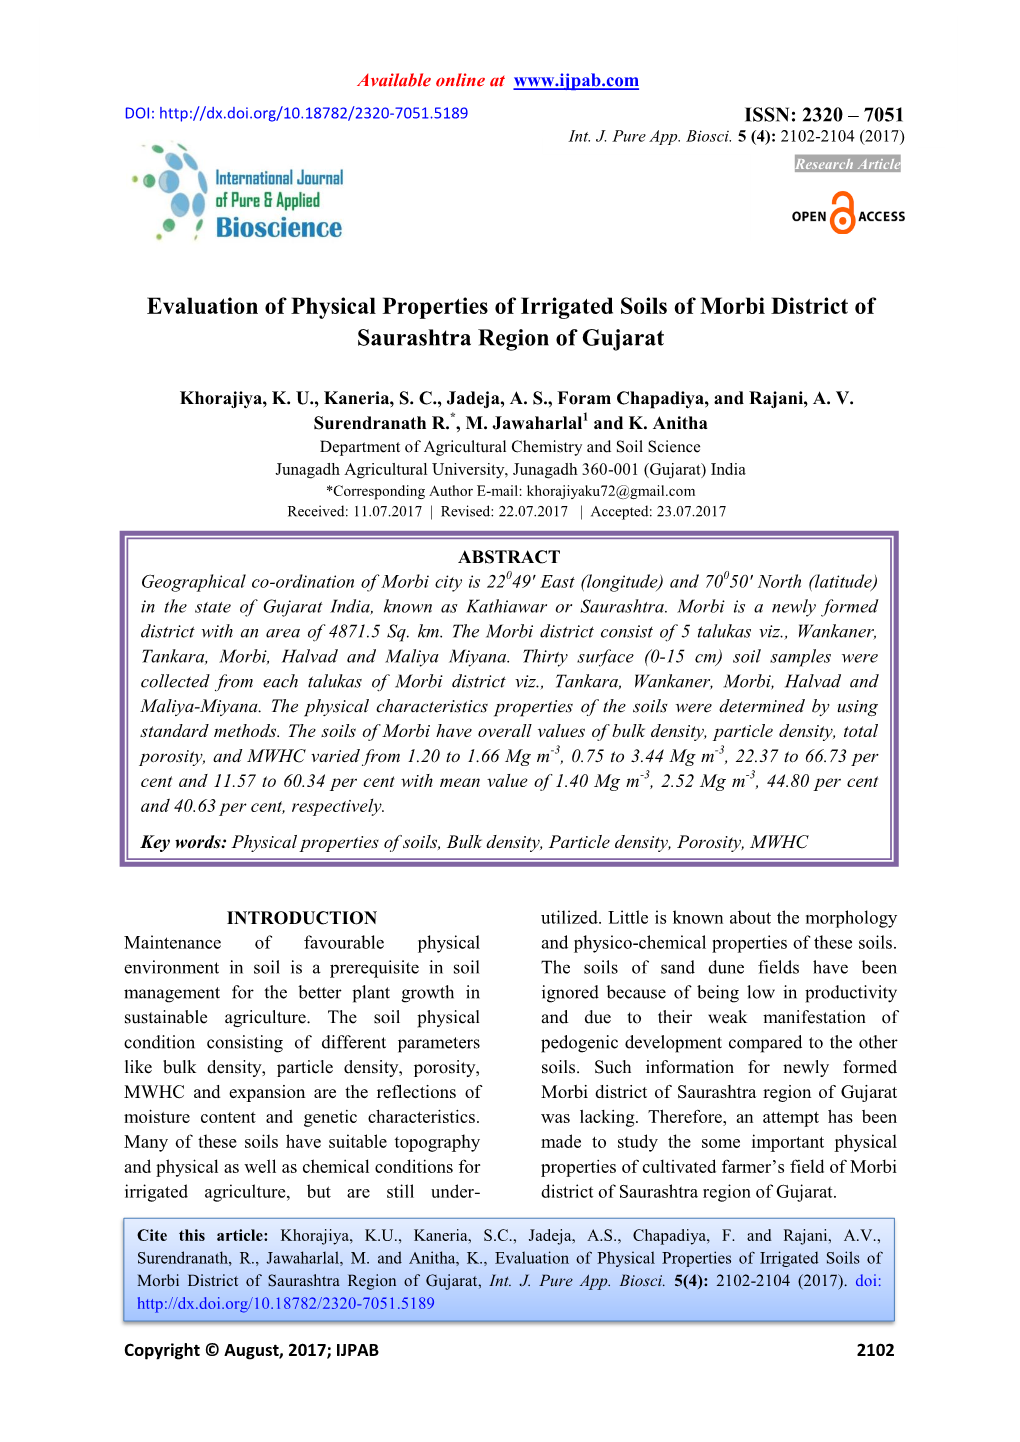 Evaluation of Physical Properties of Irrigated Soils of Morbi District of Saurashtra Region of Gujarat